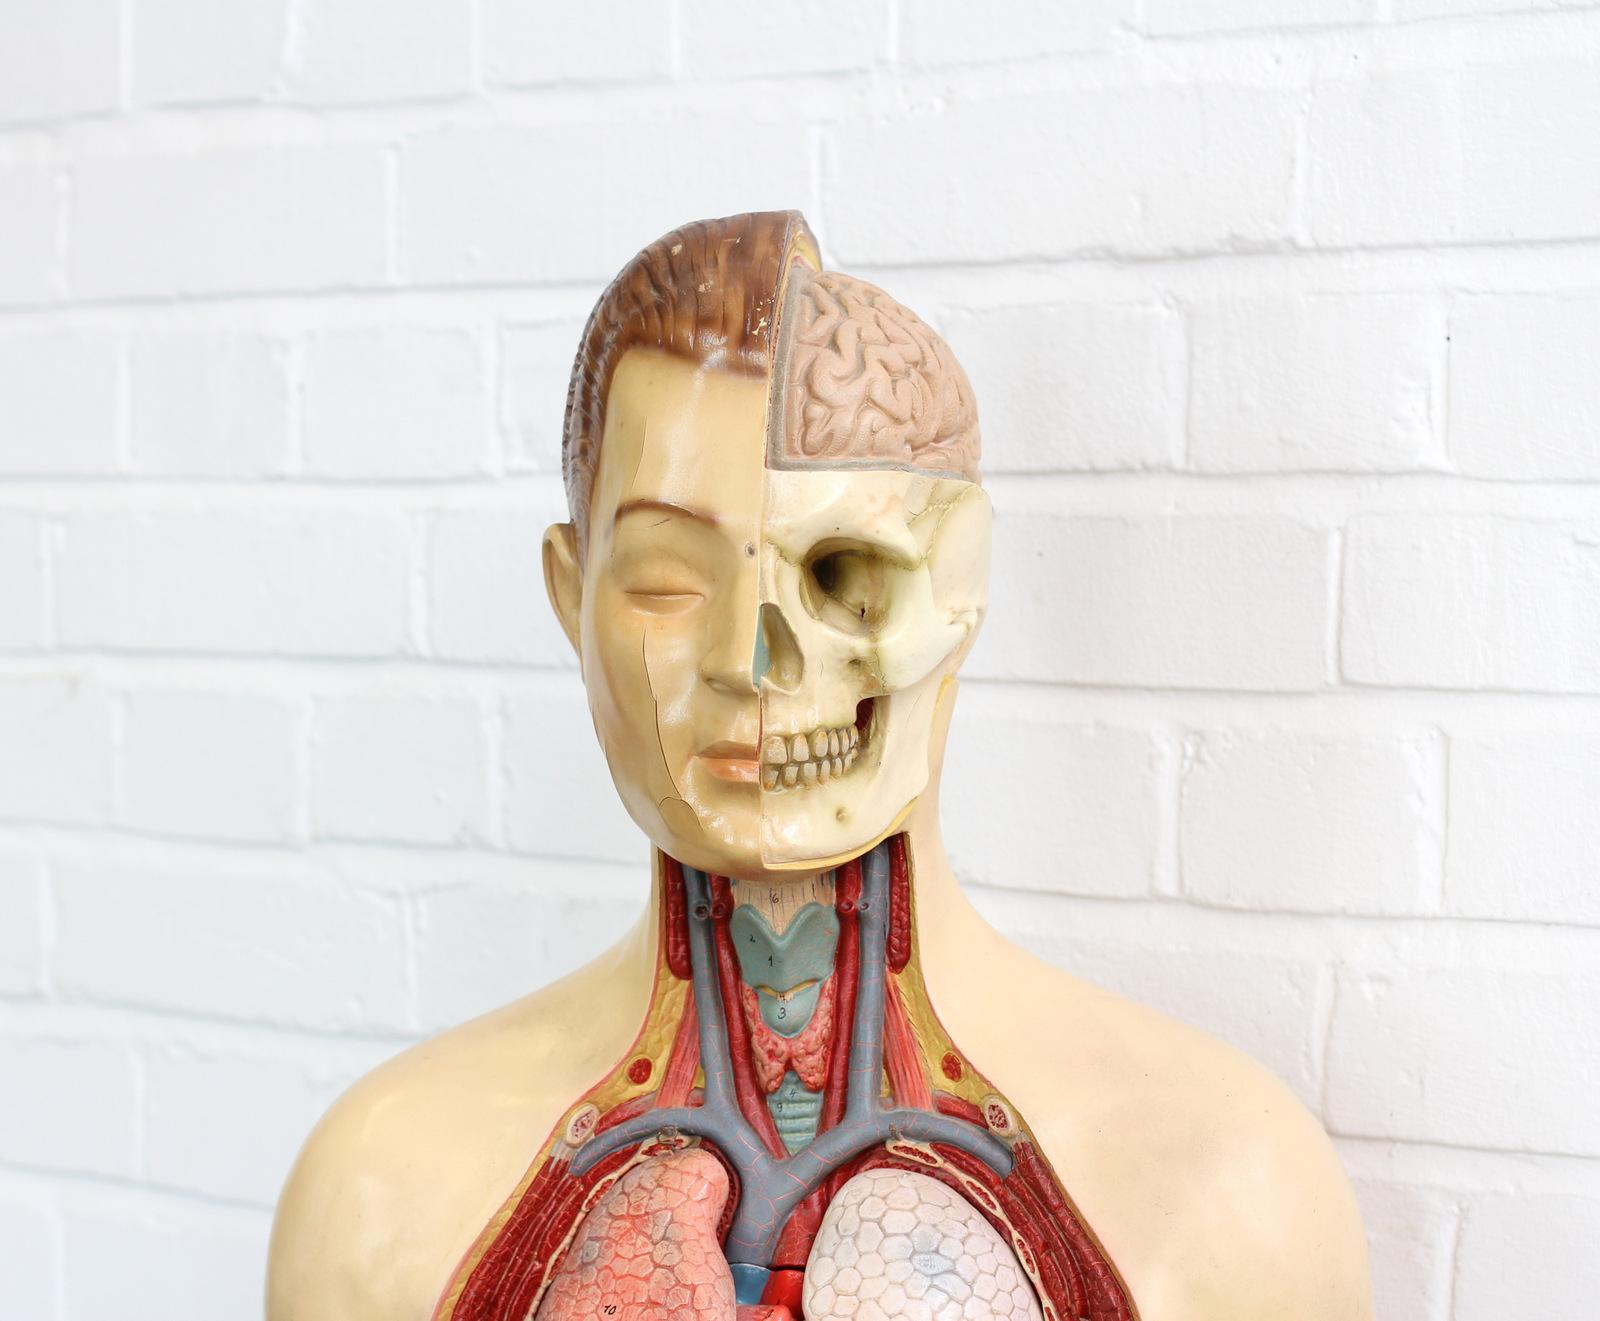 East German anatomical model, circa 1950s.

- Removable organs
- Original makers label
- Wooden base
- The model is made from hand-painted rubberoid
- East German, circa 1950s
- Measures: 37cm wide x 26cm deep x 89cm tall.

Condition